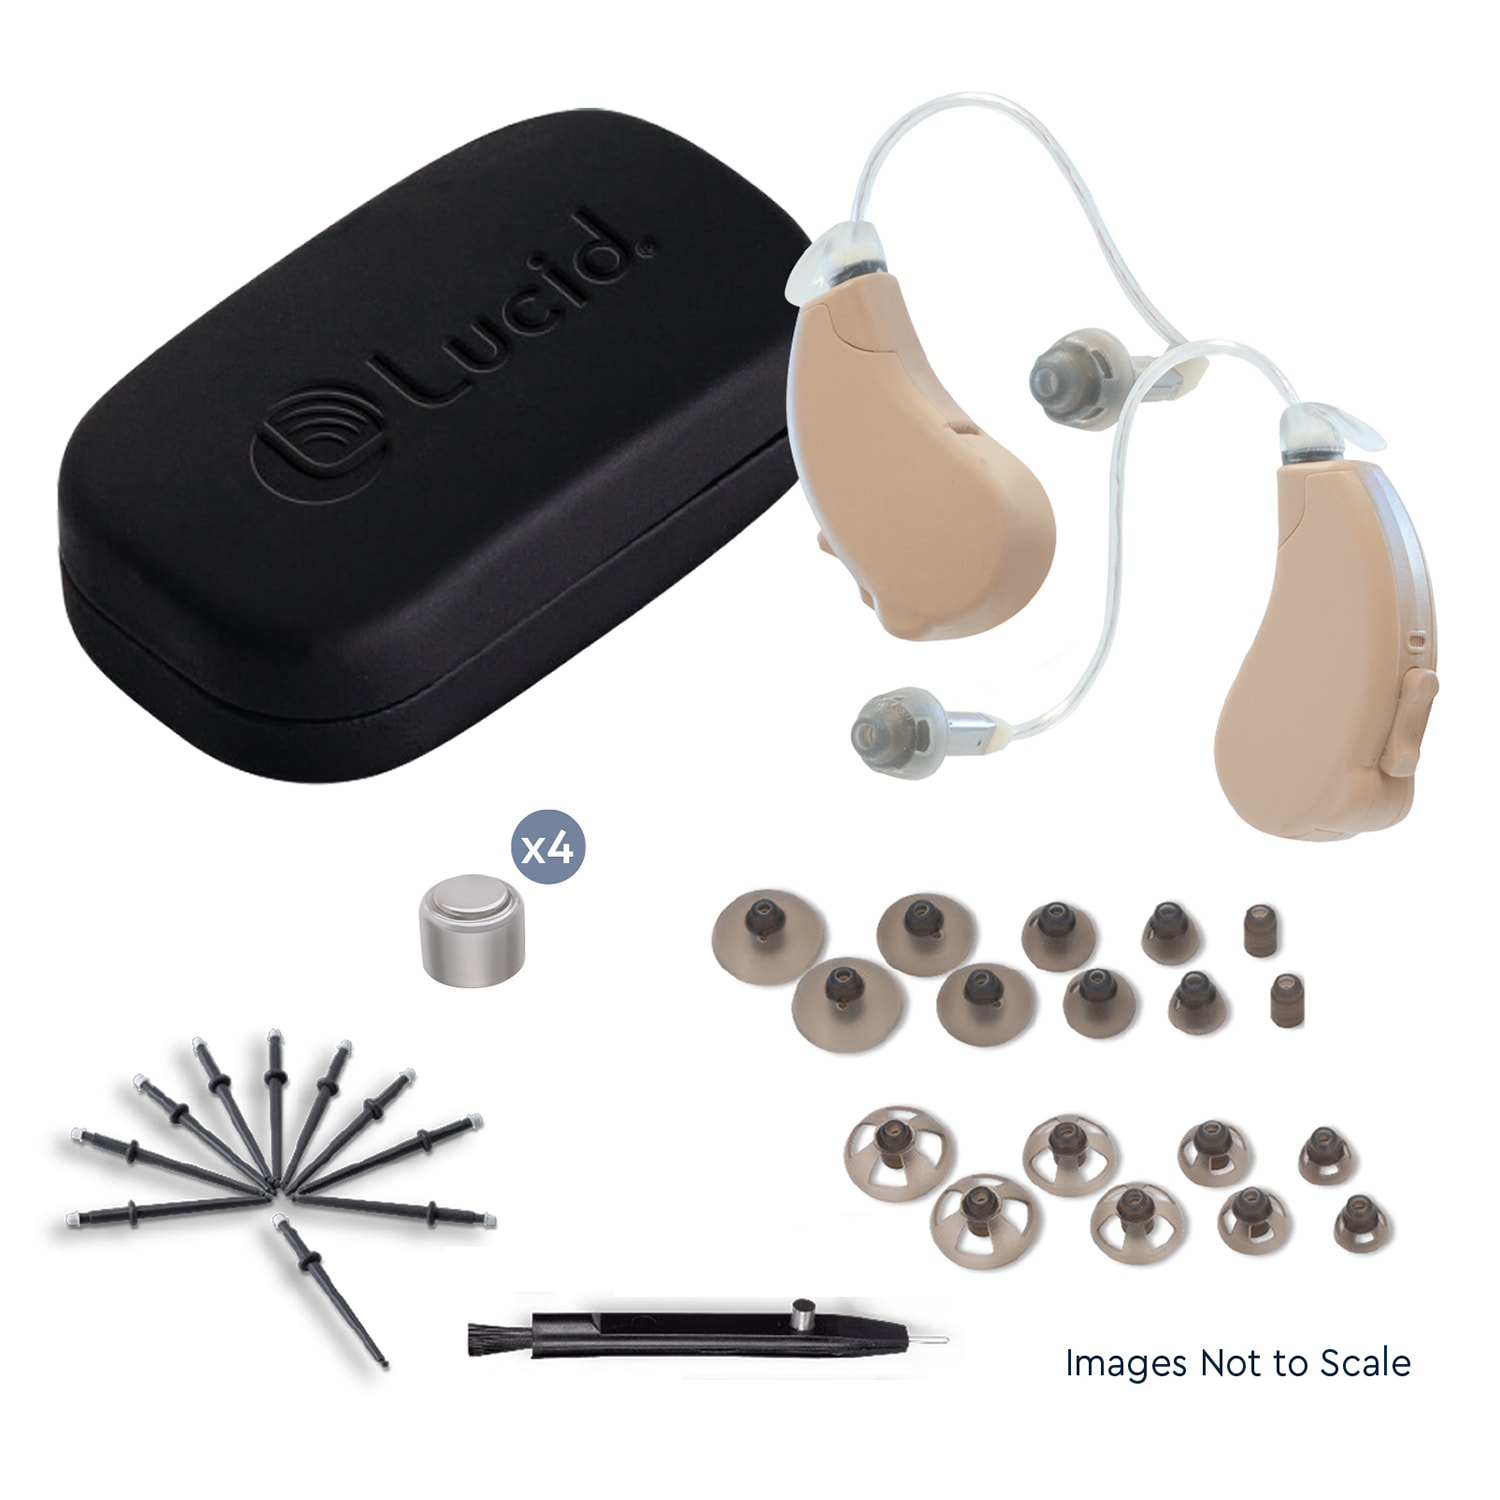 1 pair Engage Hearing Aids · 9 pairs assorted ear tips · Cleaning tool · #13 batteries · 10 wax stops · User manual